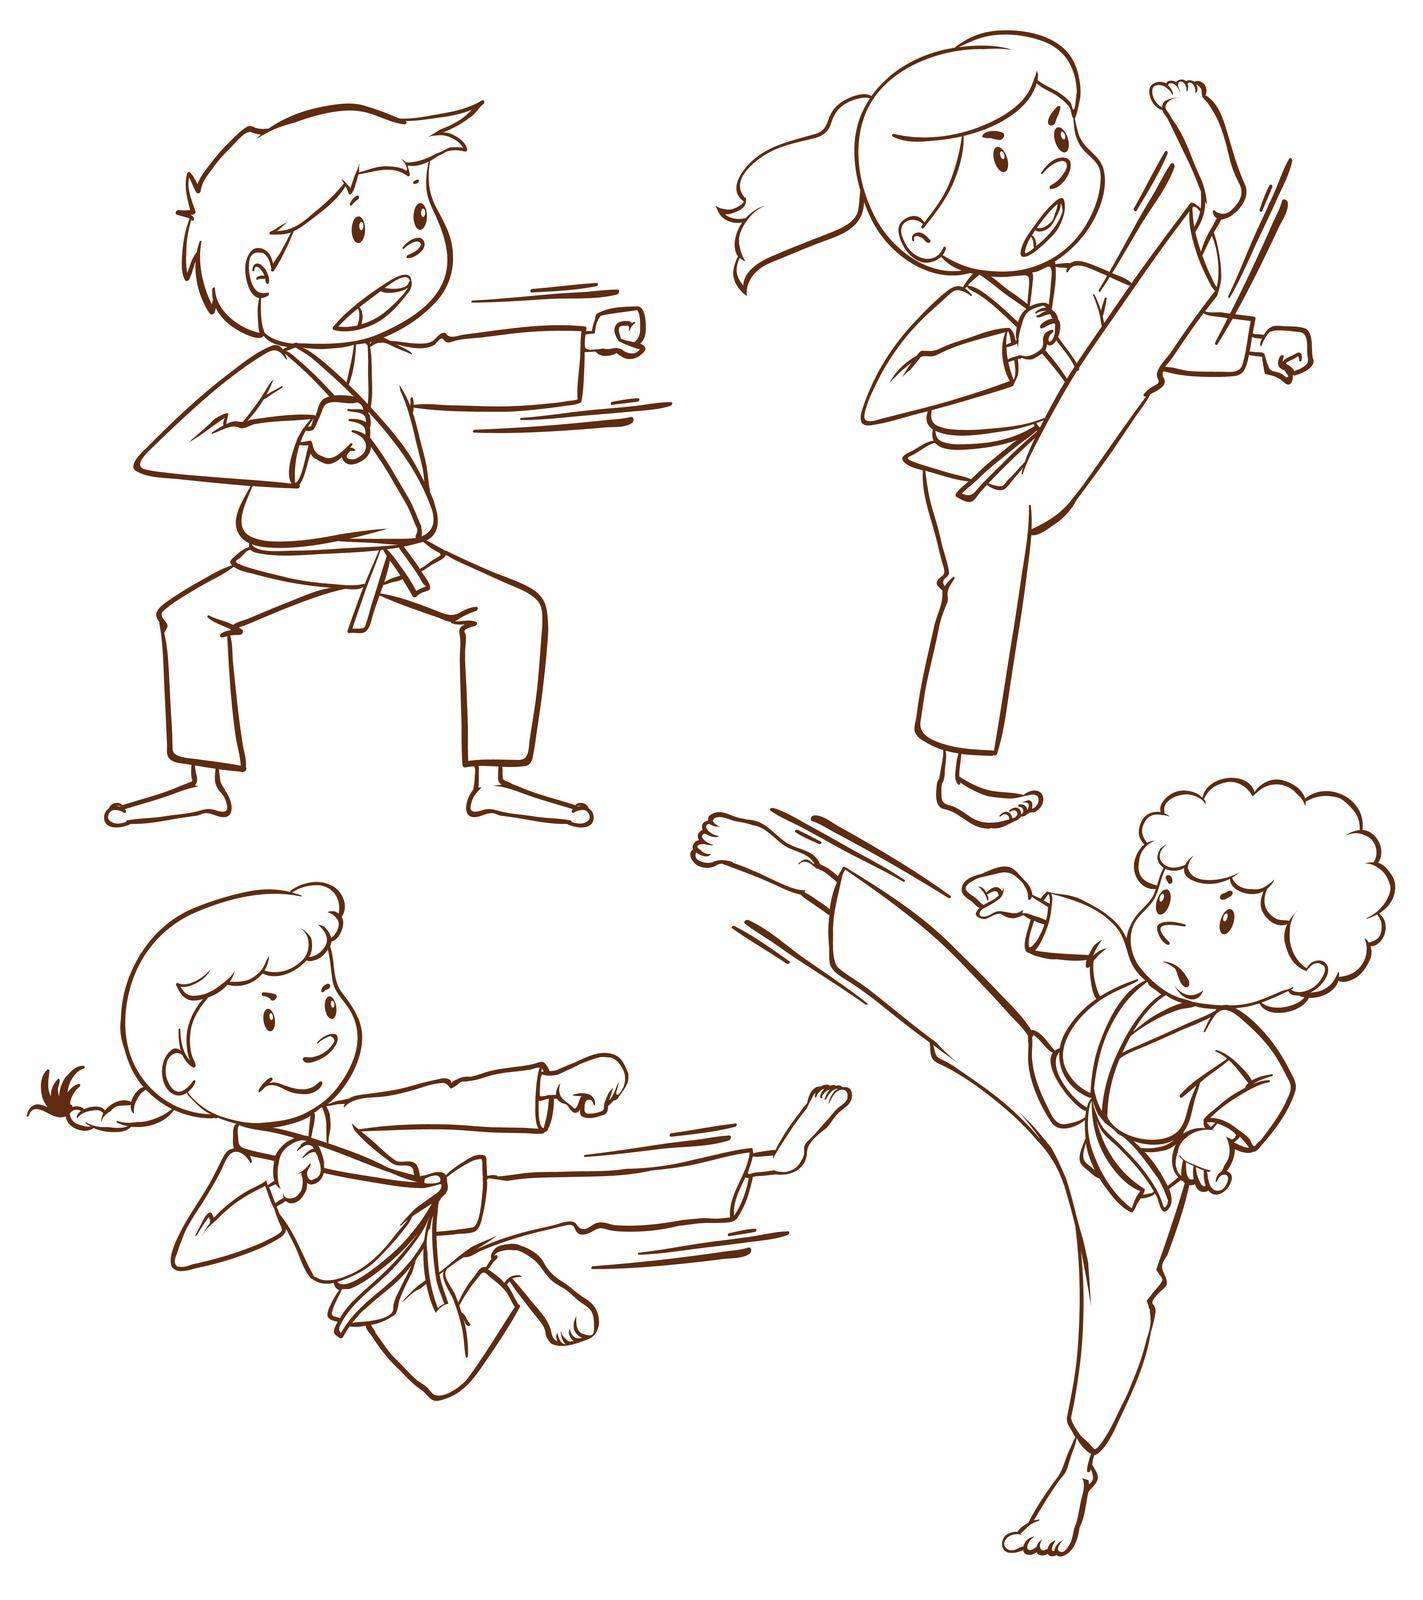 Sketches of people doing martial arts by iimages